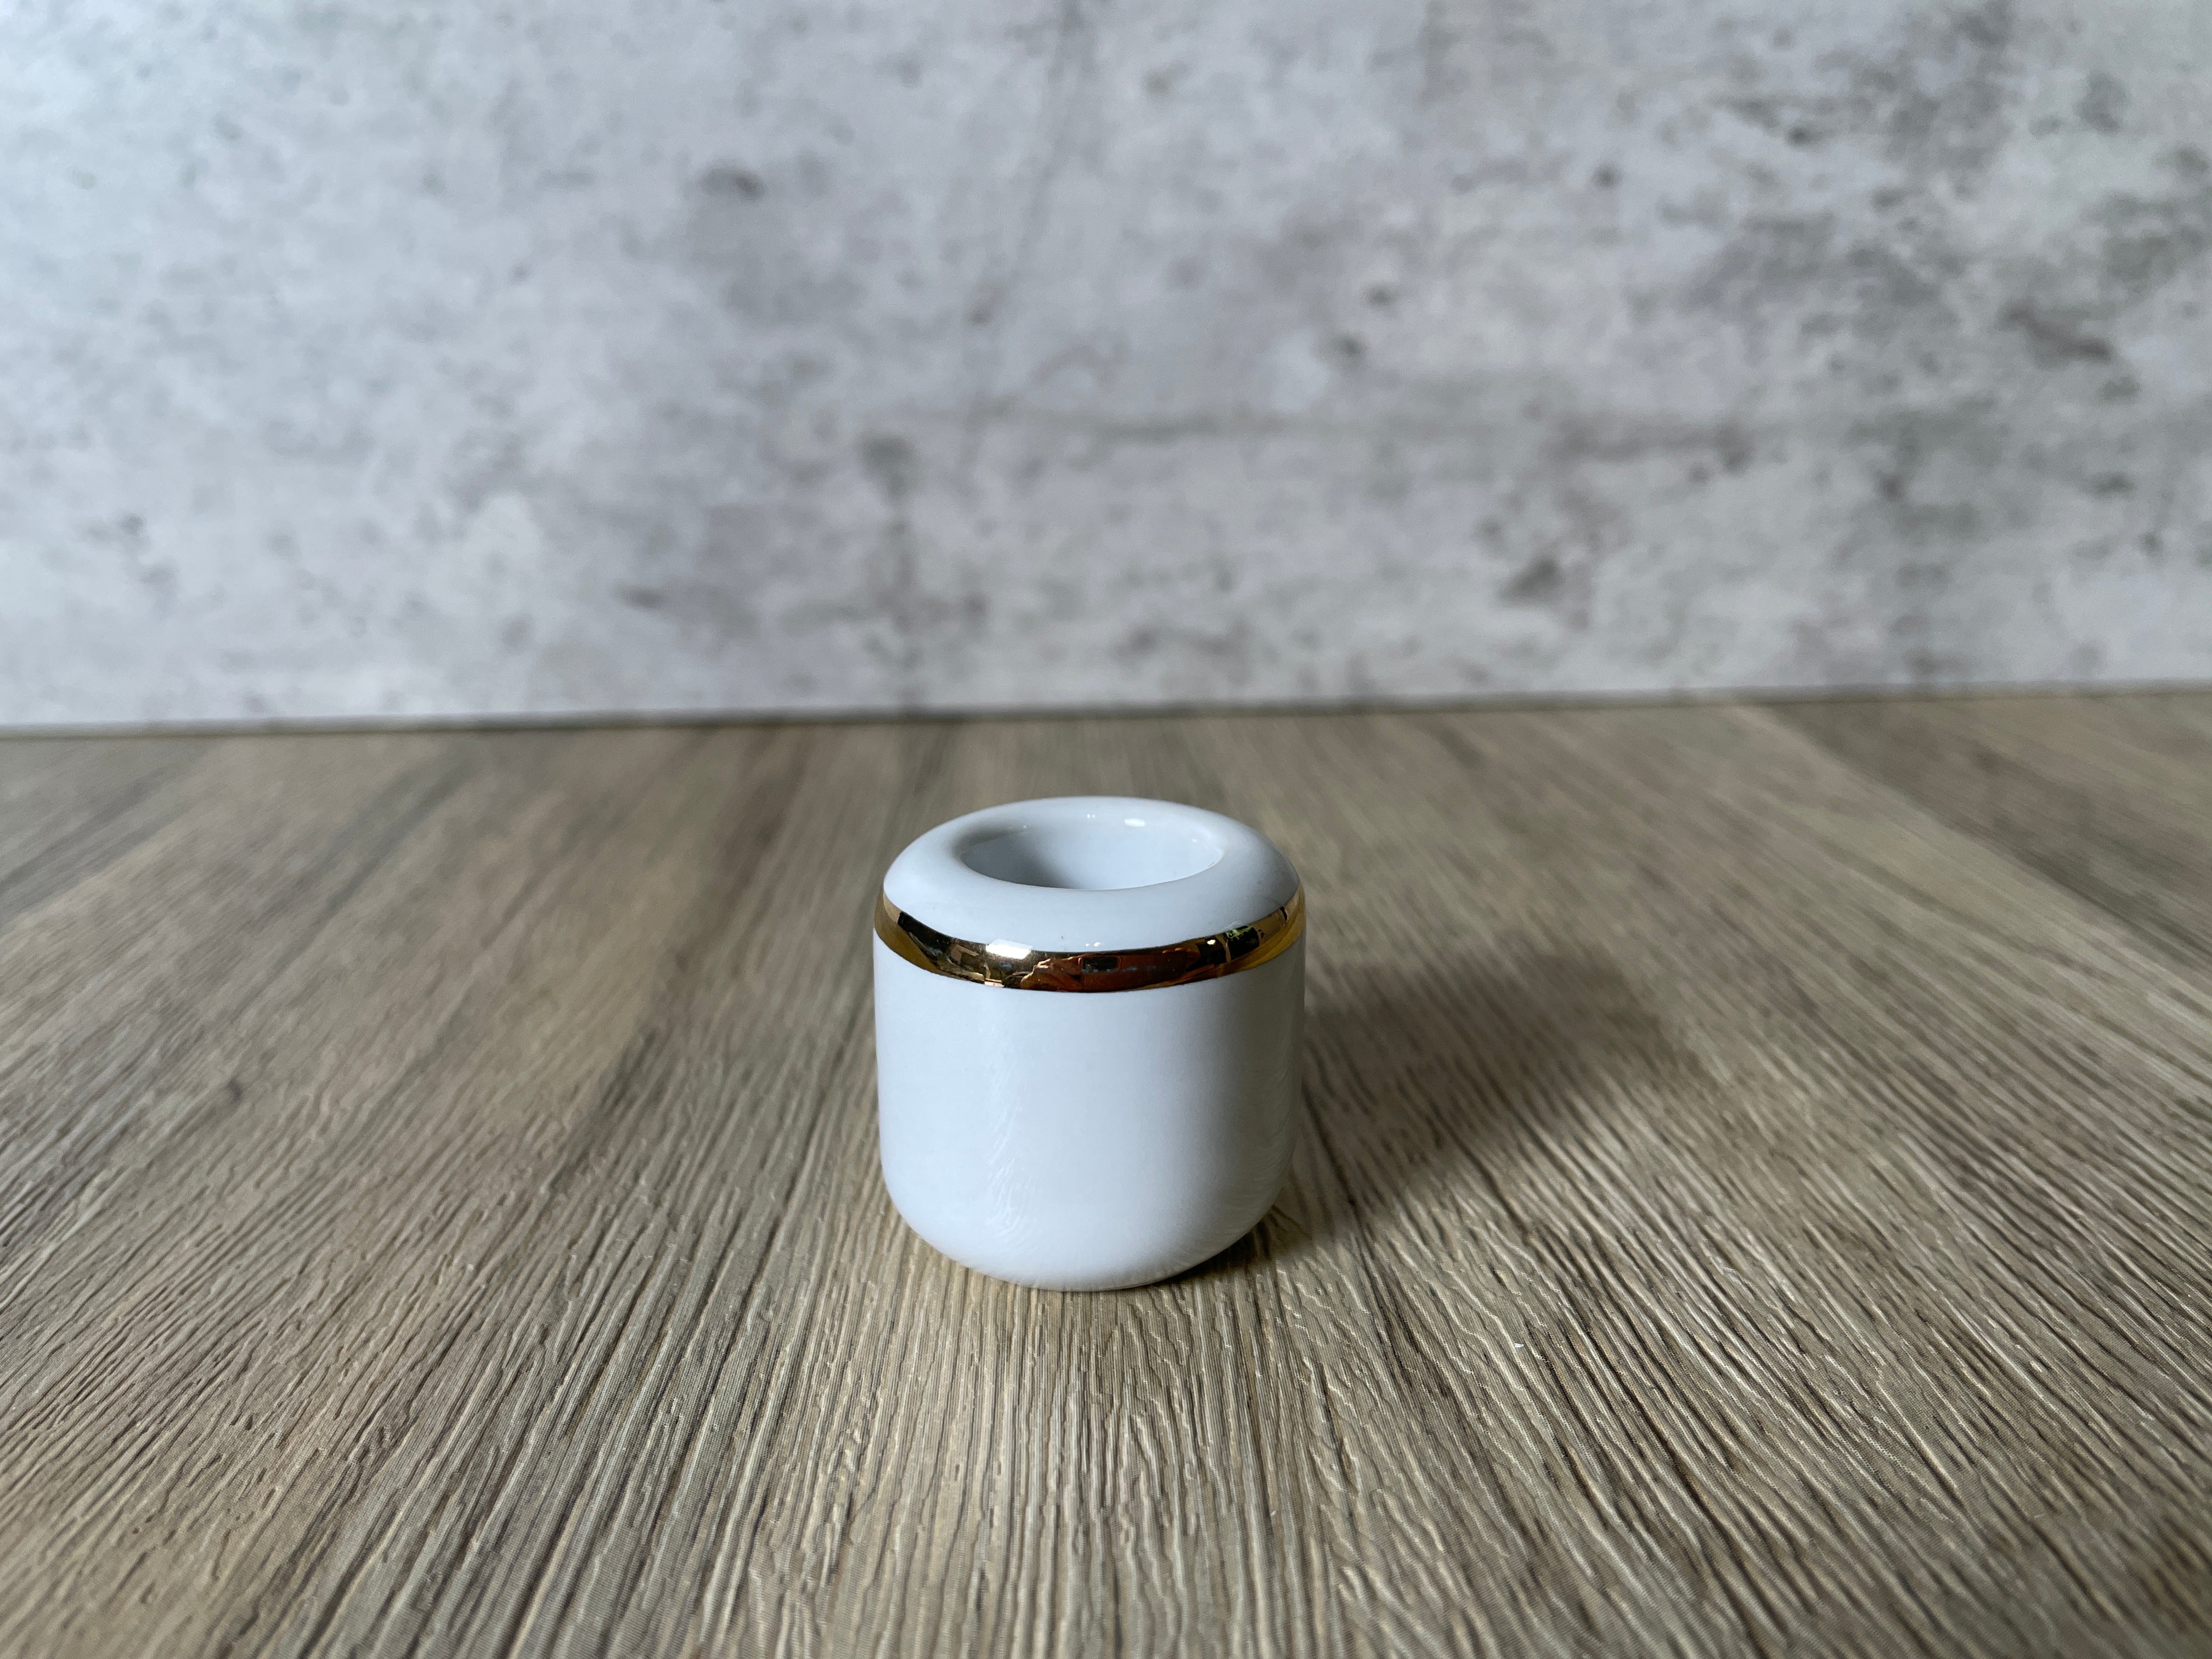 Buy Online Latest and Unique White Chime Candle Holder - Ceramic with Gold Band | Shop Best Spiritual Items - The Mystical Ritual